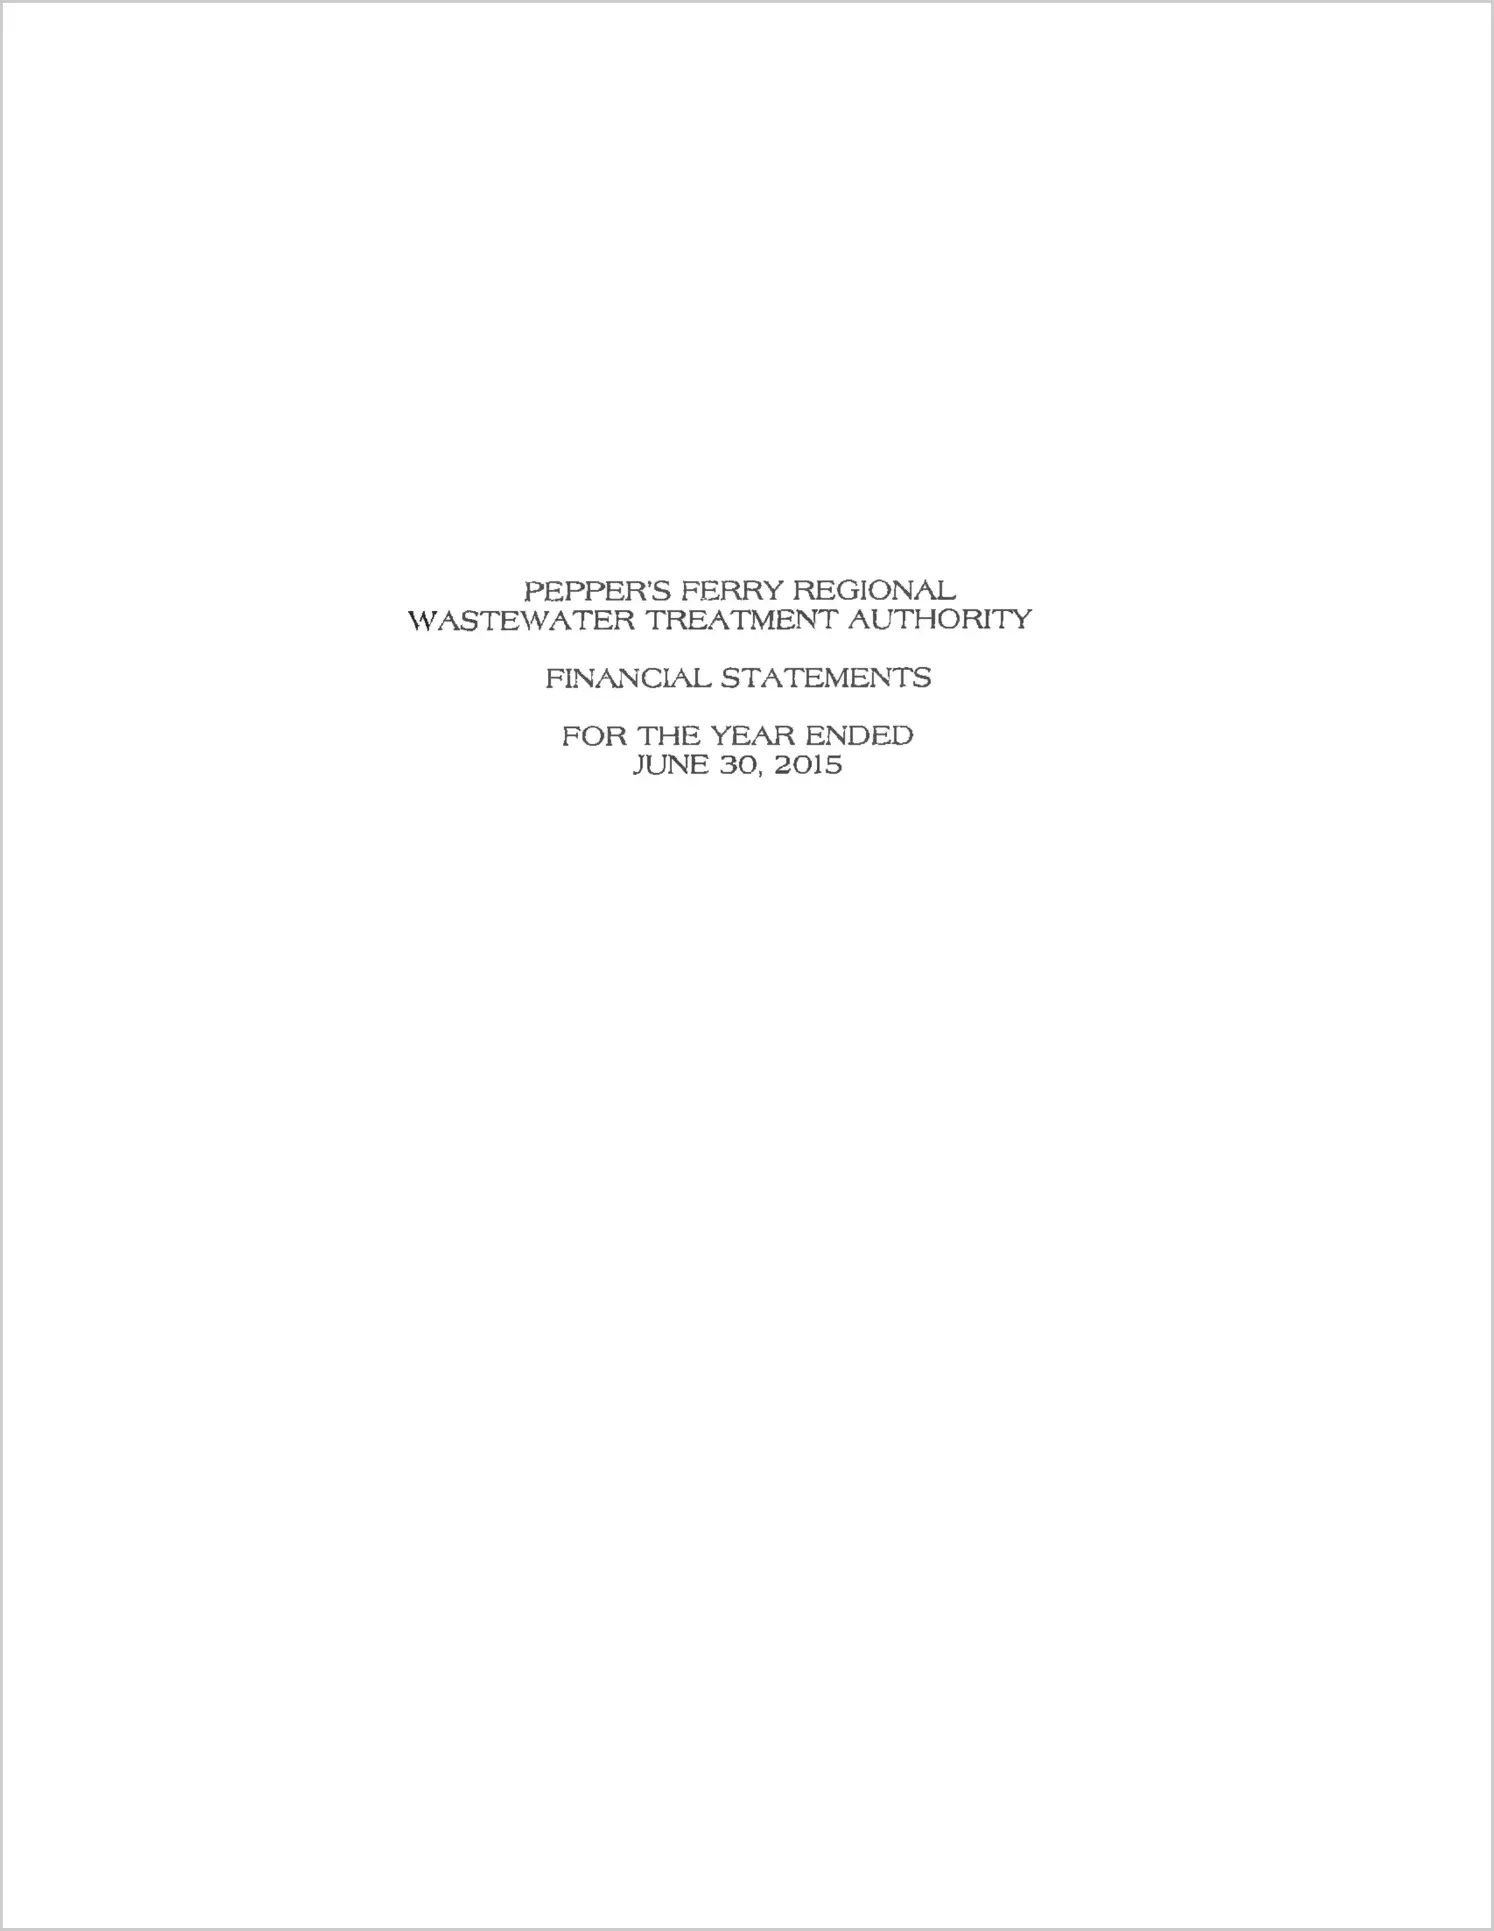 2015 ABC/Other Annual Financial Report  for Pepper's Ferry Regional Wastewater Treatment Authority